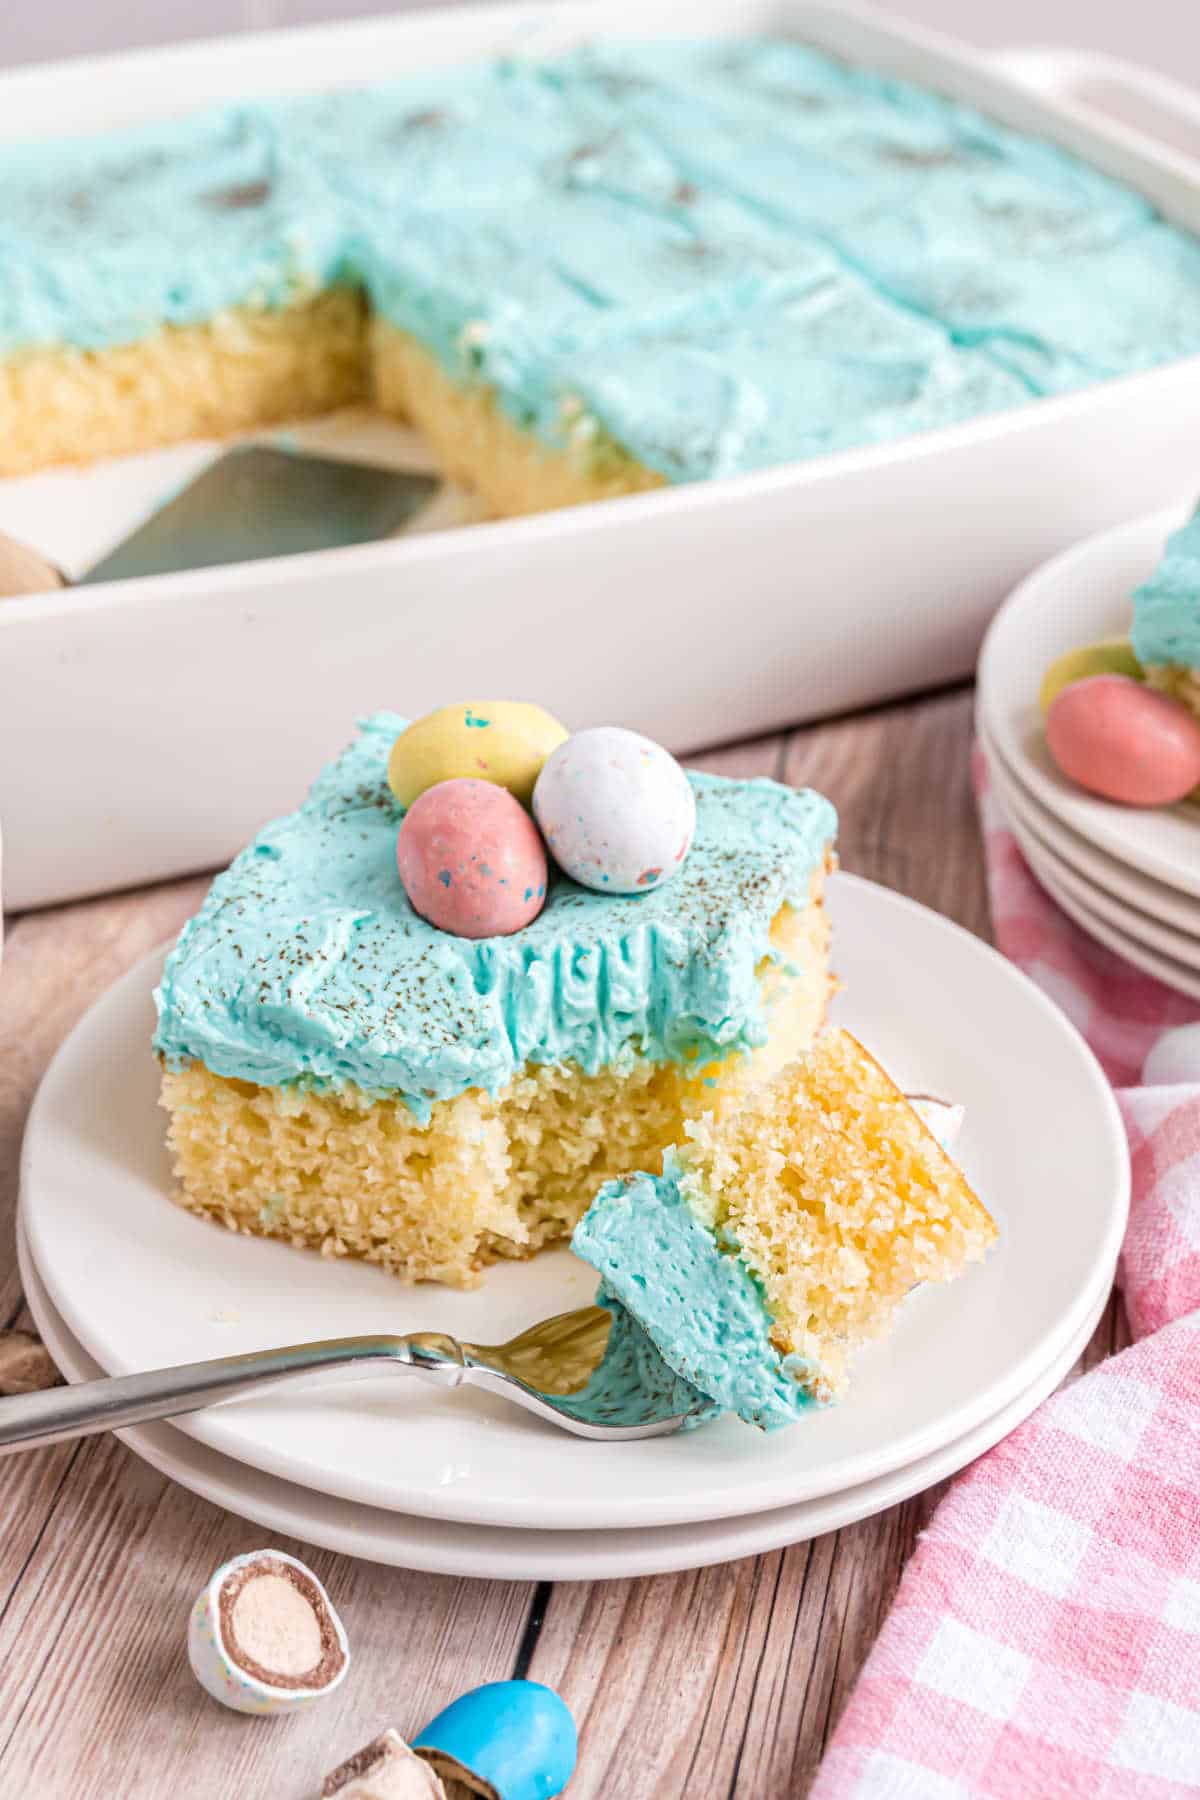 Slice of yellow cake with blue frosting and bite taken out.